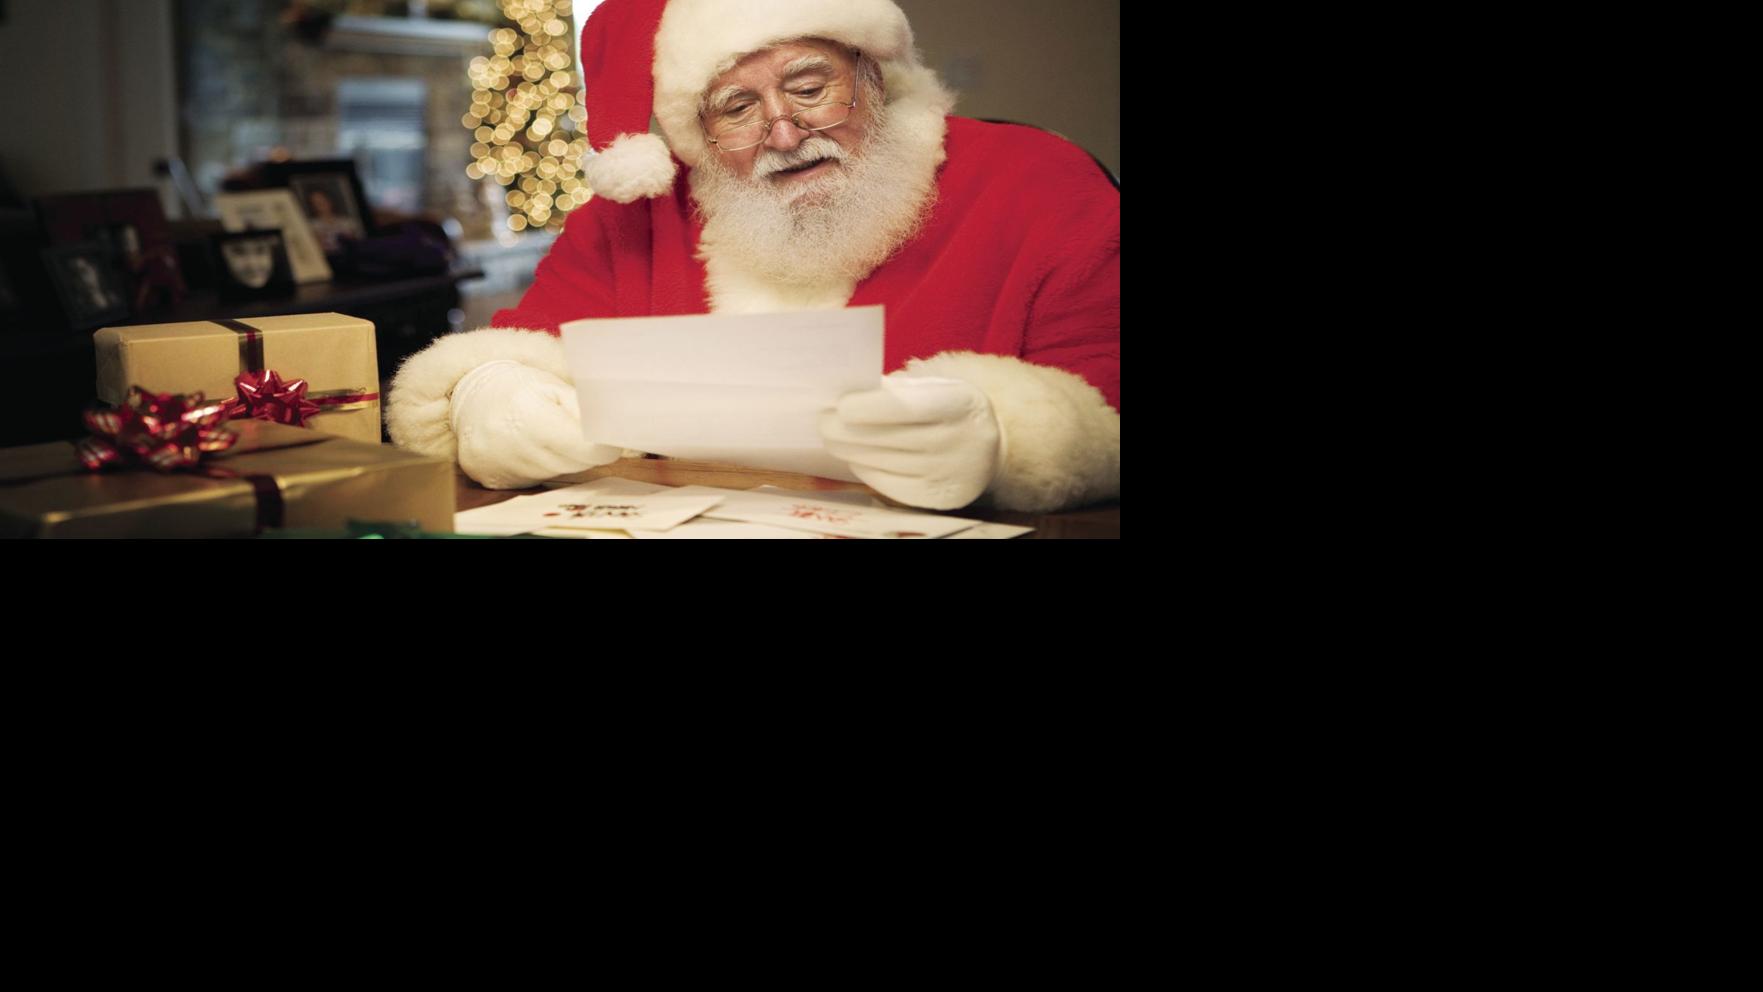 Find Your Child S List Letters To Santa 2018 Local Herald Review Com - zach nolan mask roblox catalog roblox free download play